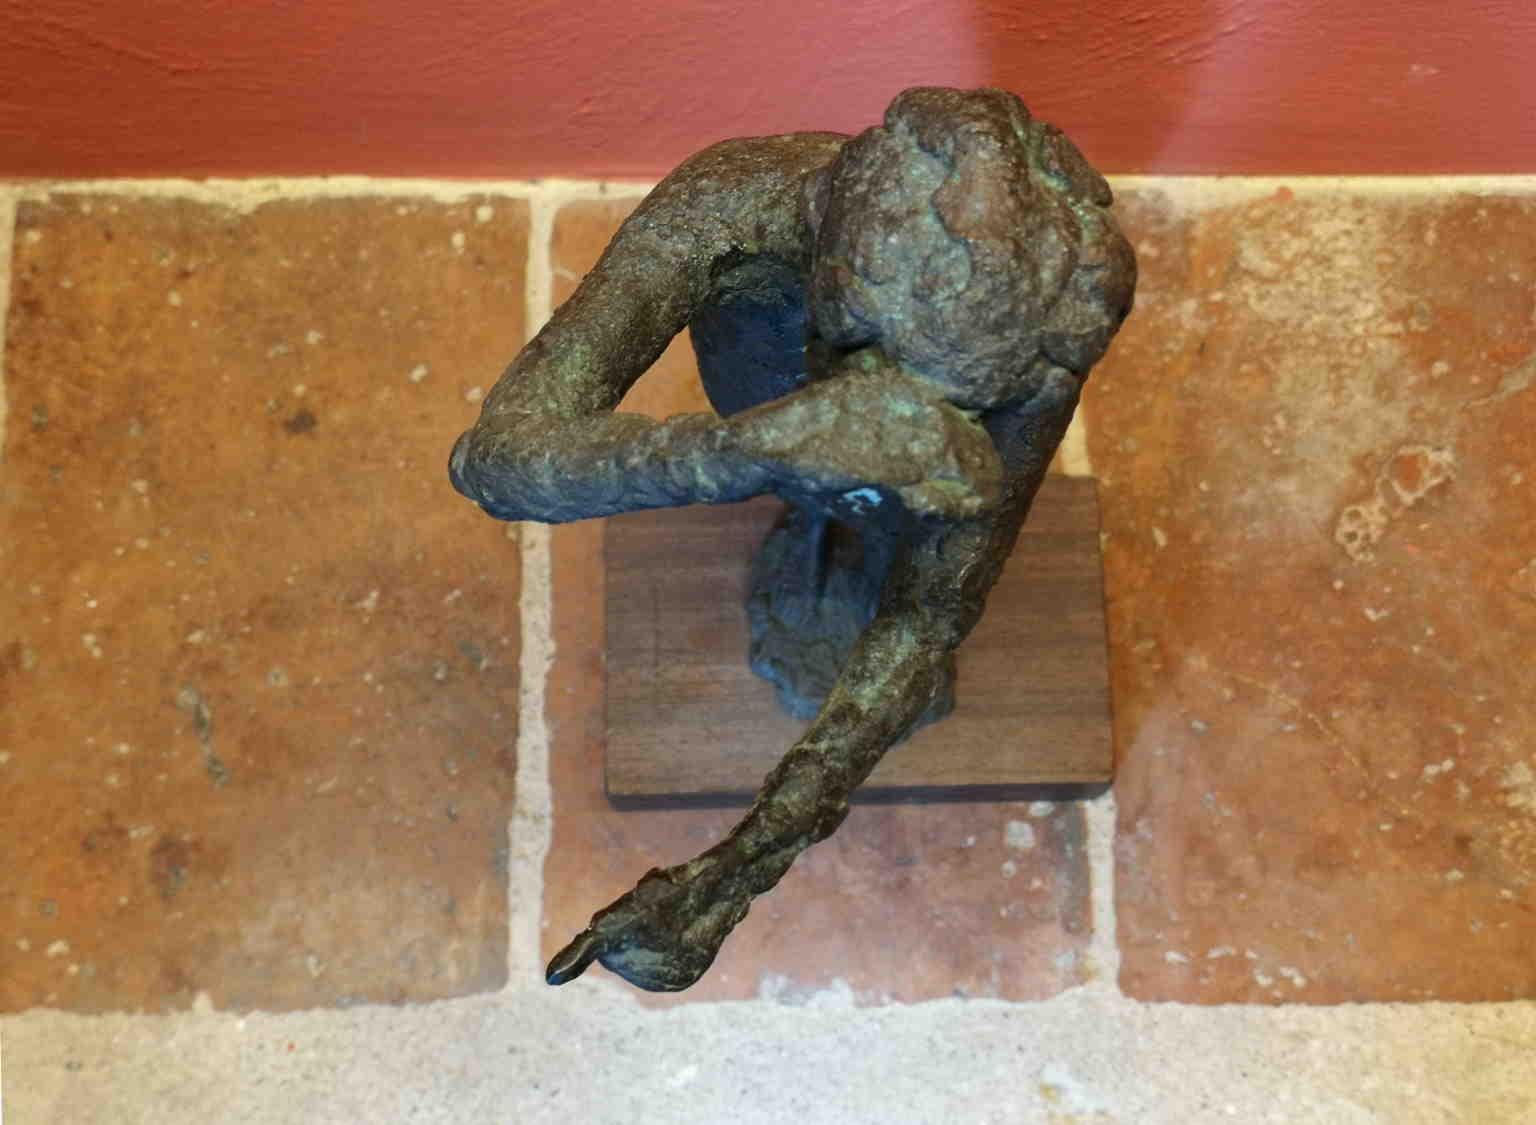 Tuscan Florentine Figurative Abstract Female Bronze Statue 20th century  - Gold Abstract Sculpture by Quinto Martini